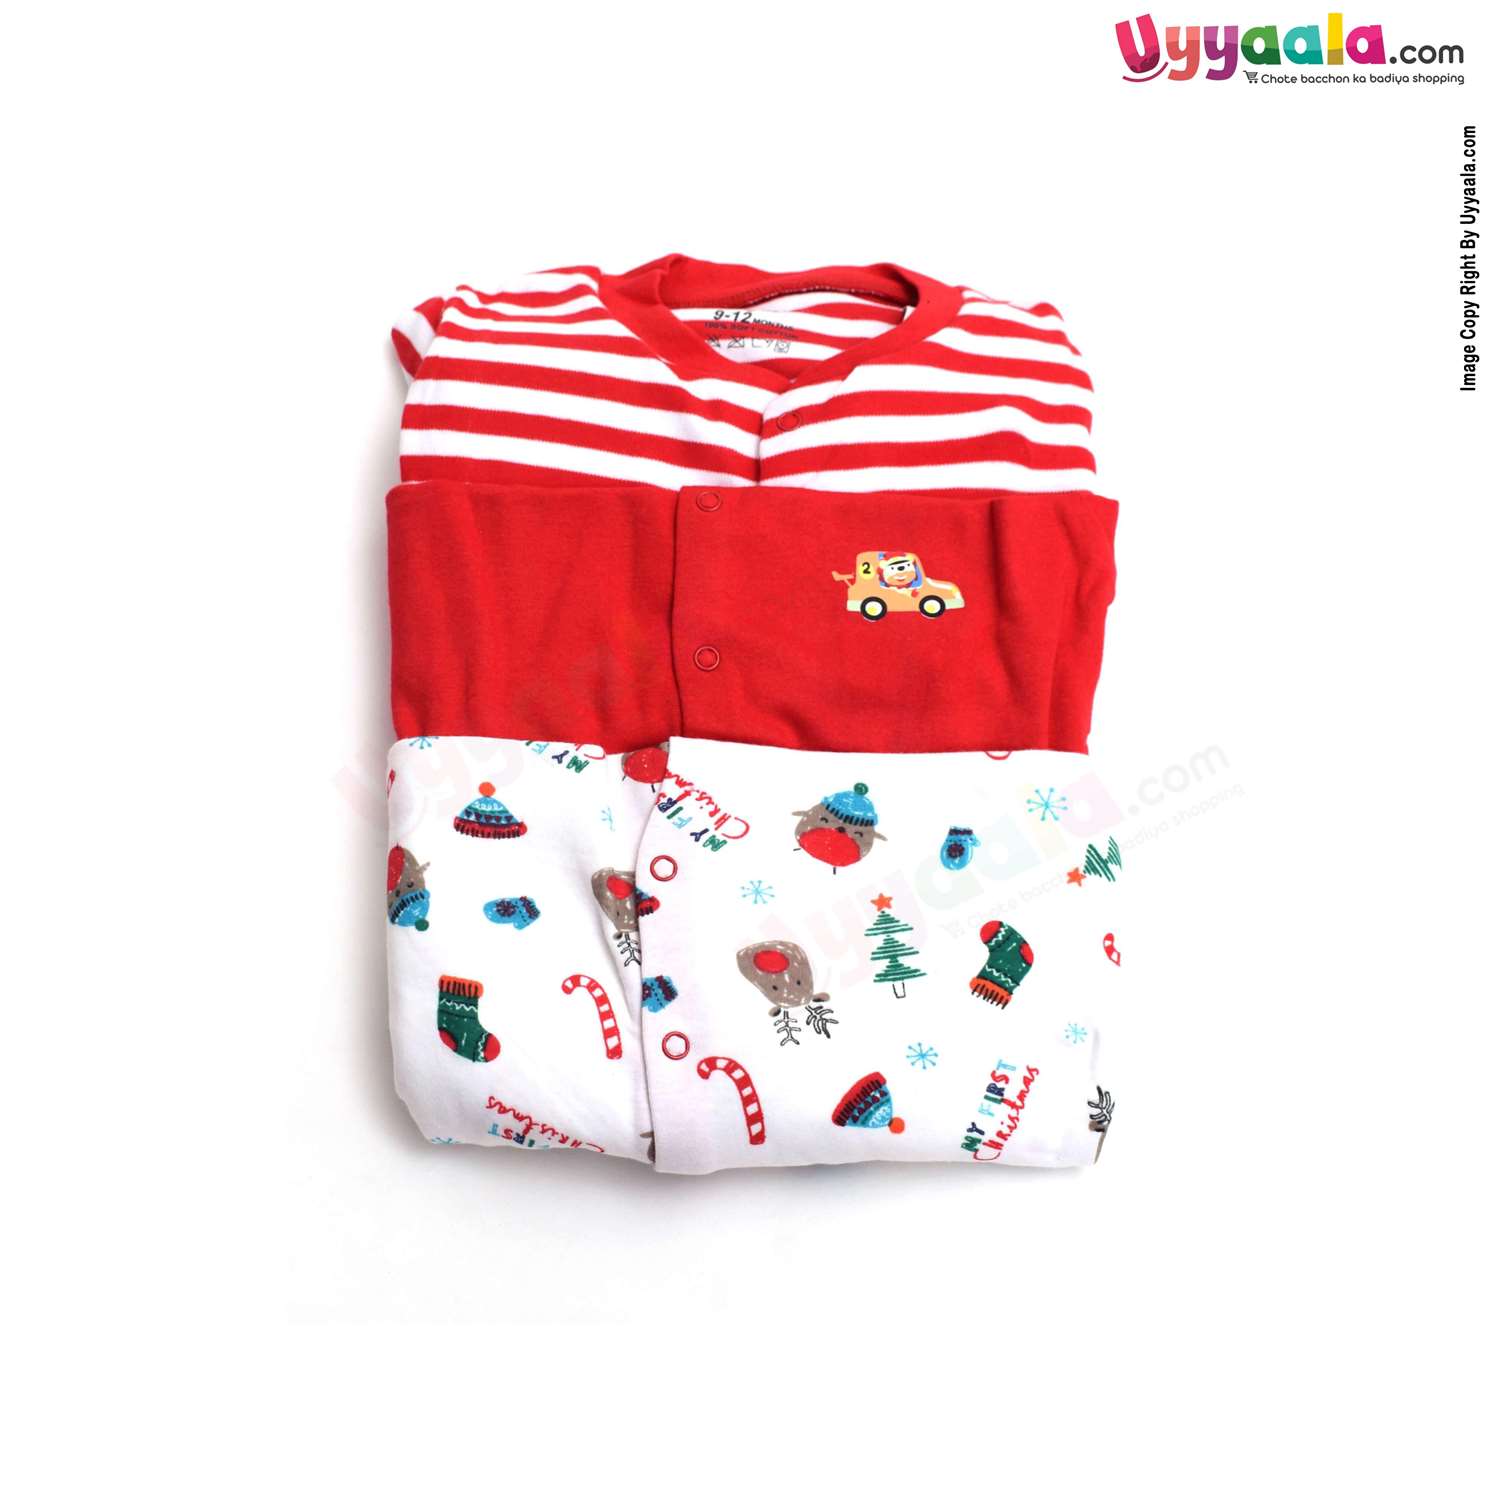 PRECIOUS ONE Sleep Suits soft Hosiery Cotton - Stripes Print Red & White, Plain Red and Christmas Printed White 3P Pack (9-12M)